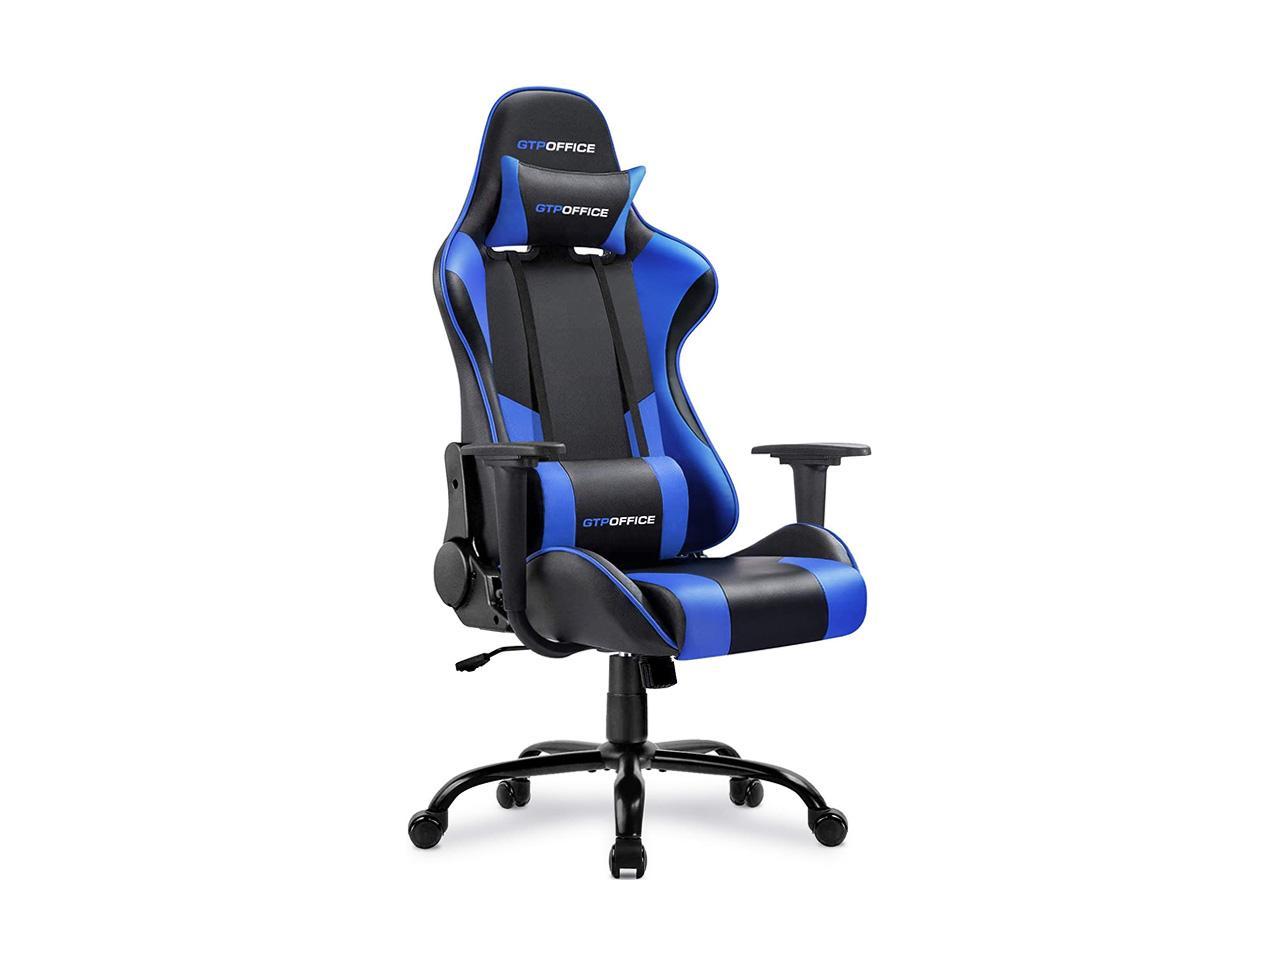  GTRACING  Gaming  Chair  Massage Office Computer GTPOFFICE 